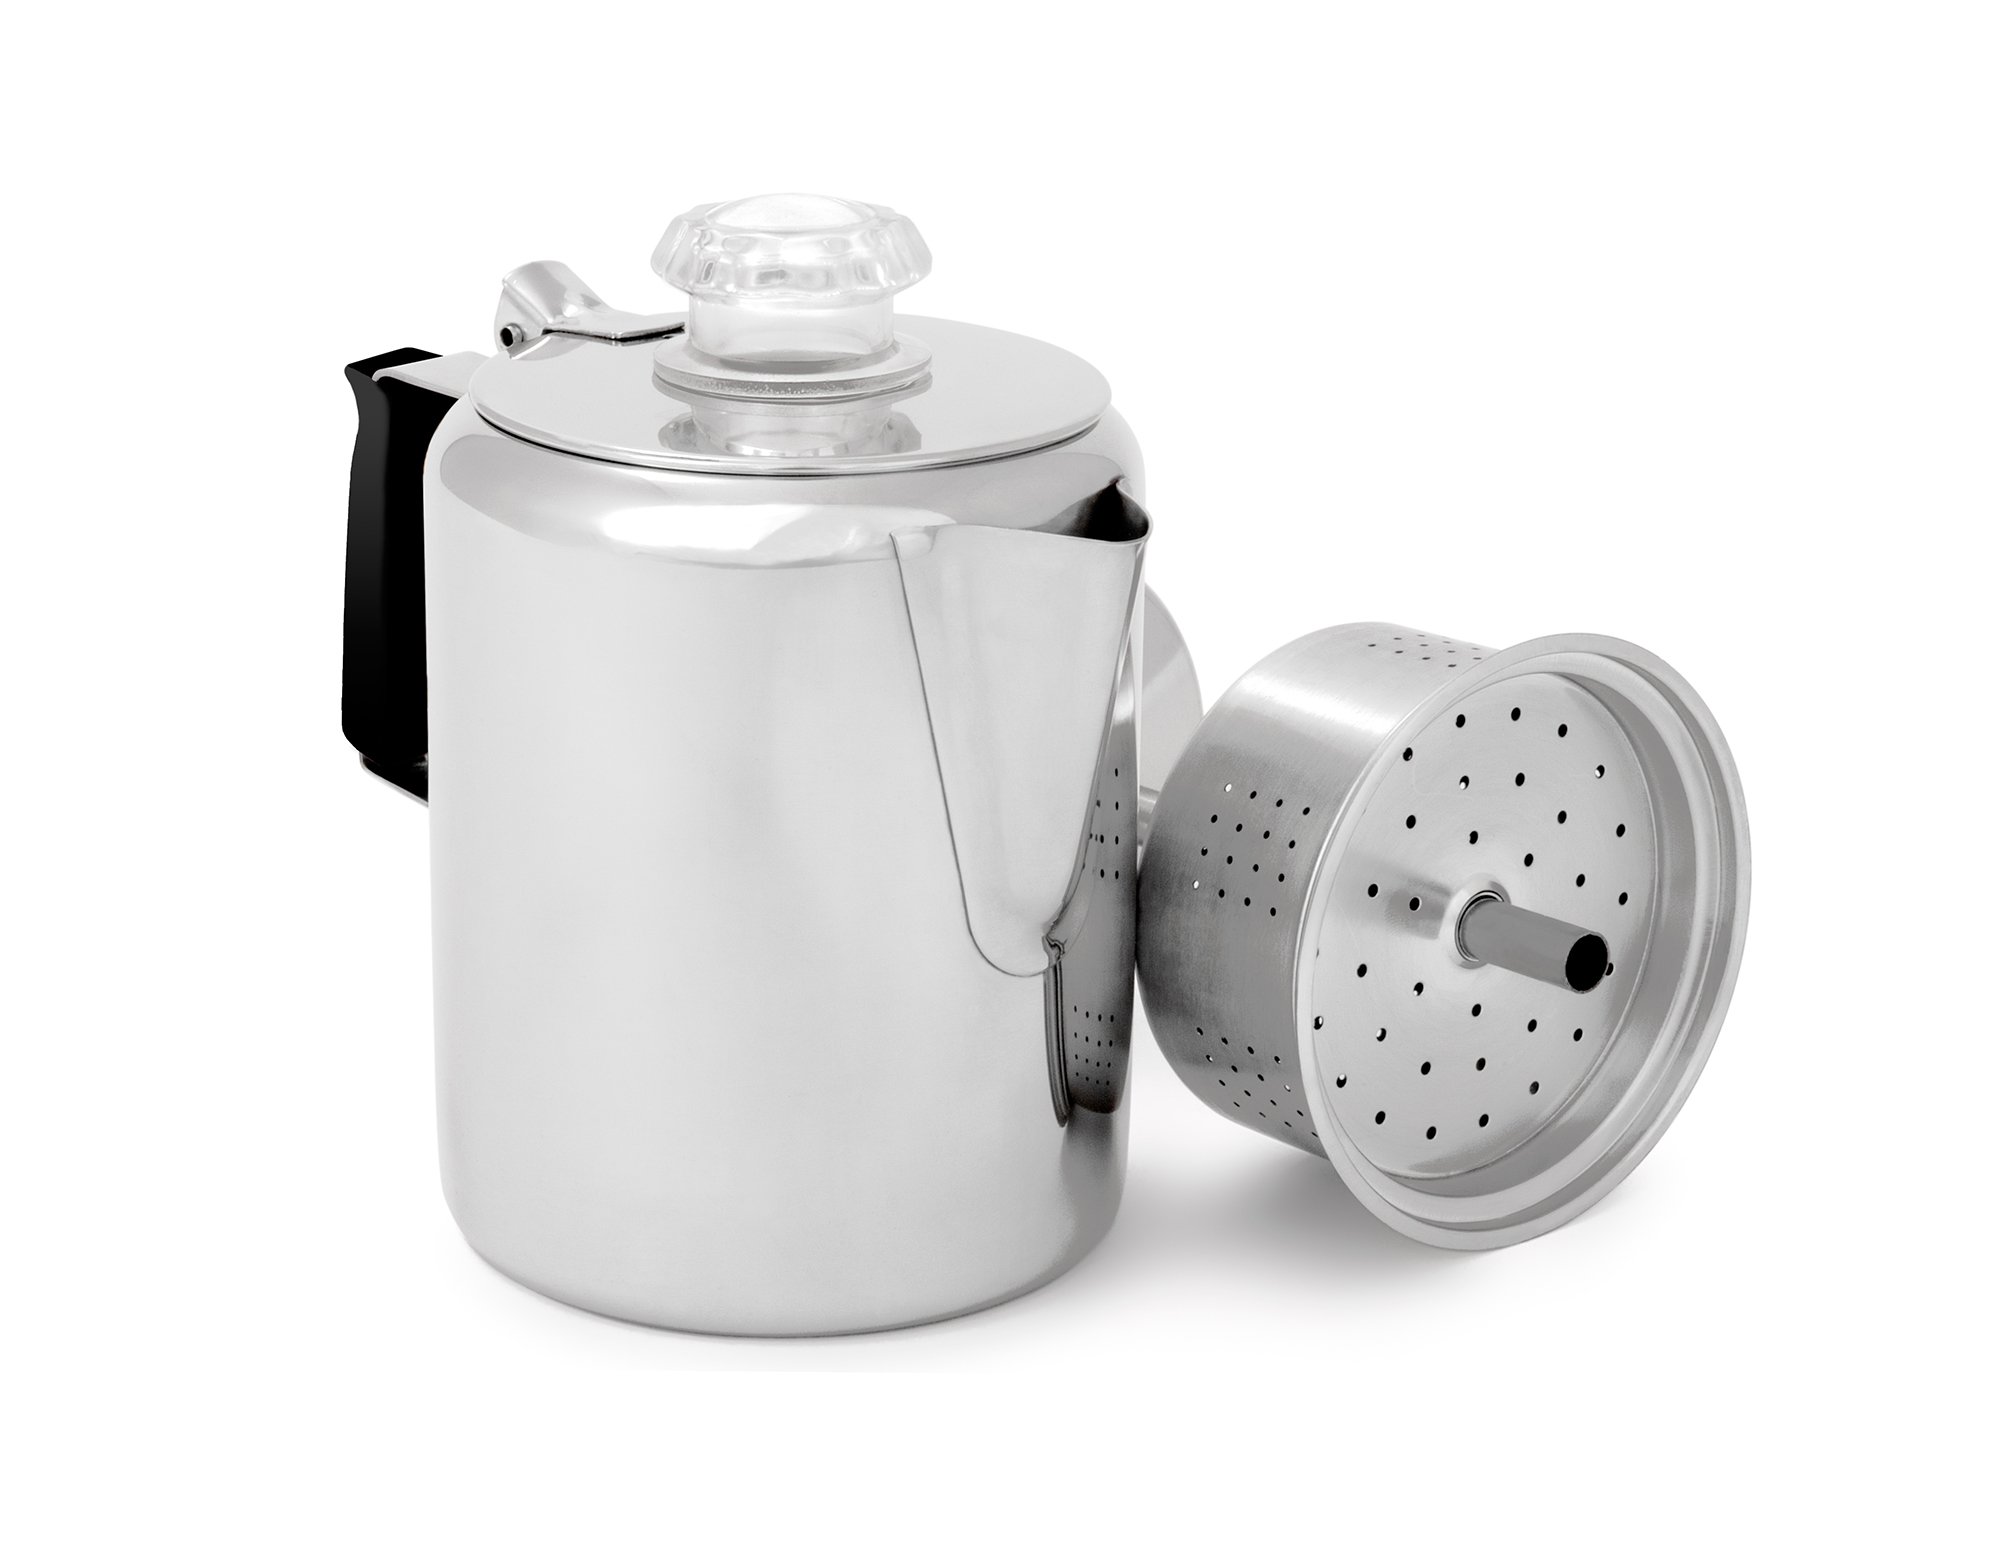 Coffee Percolator,Camping Coffee Pot 9 Cups Stainless Steel Coffee Maker with Clear Glass Knob, Percolator Coffee Pot for Campfire or Stovetop Coffee